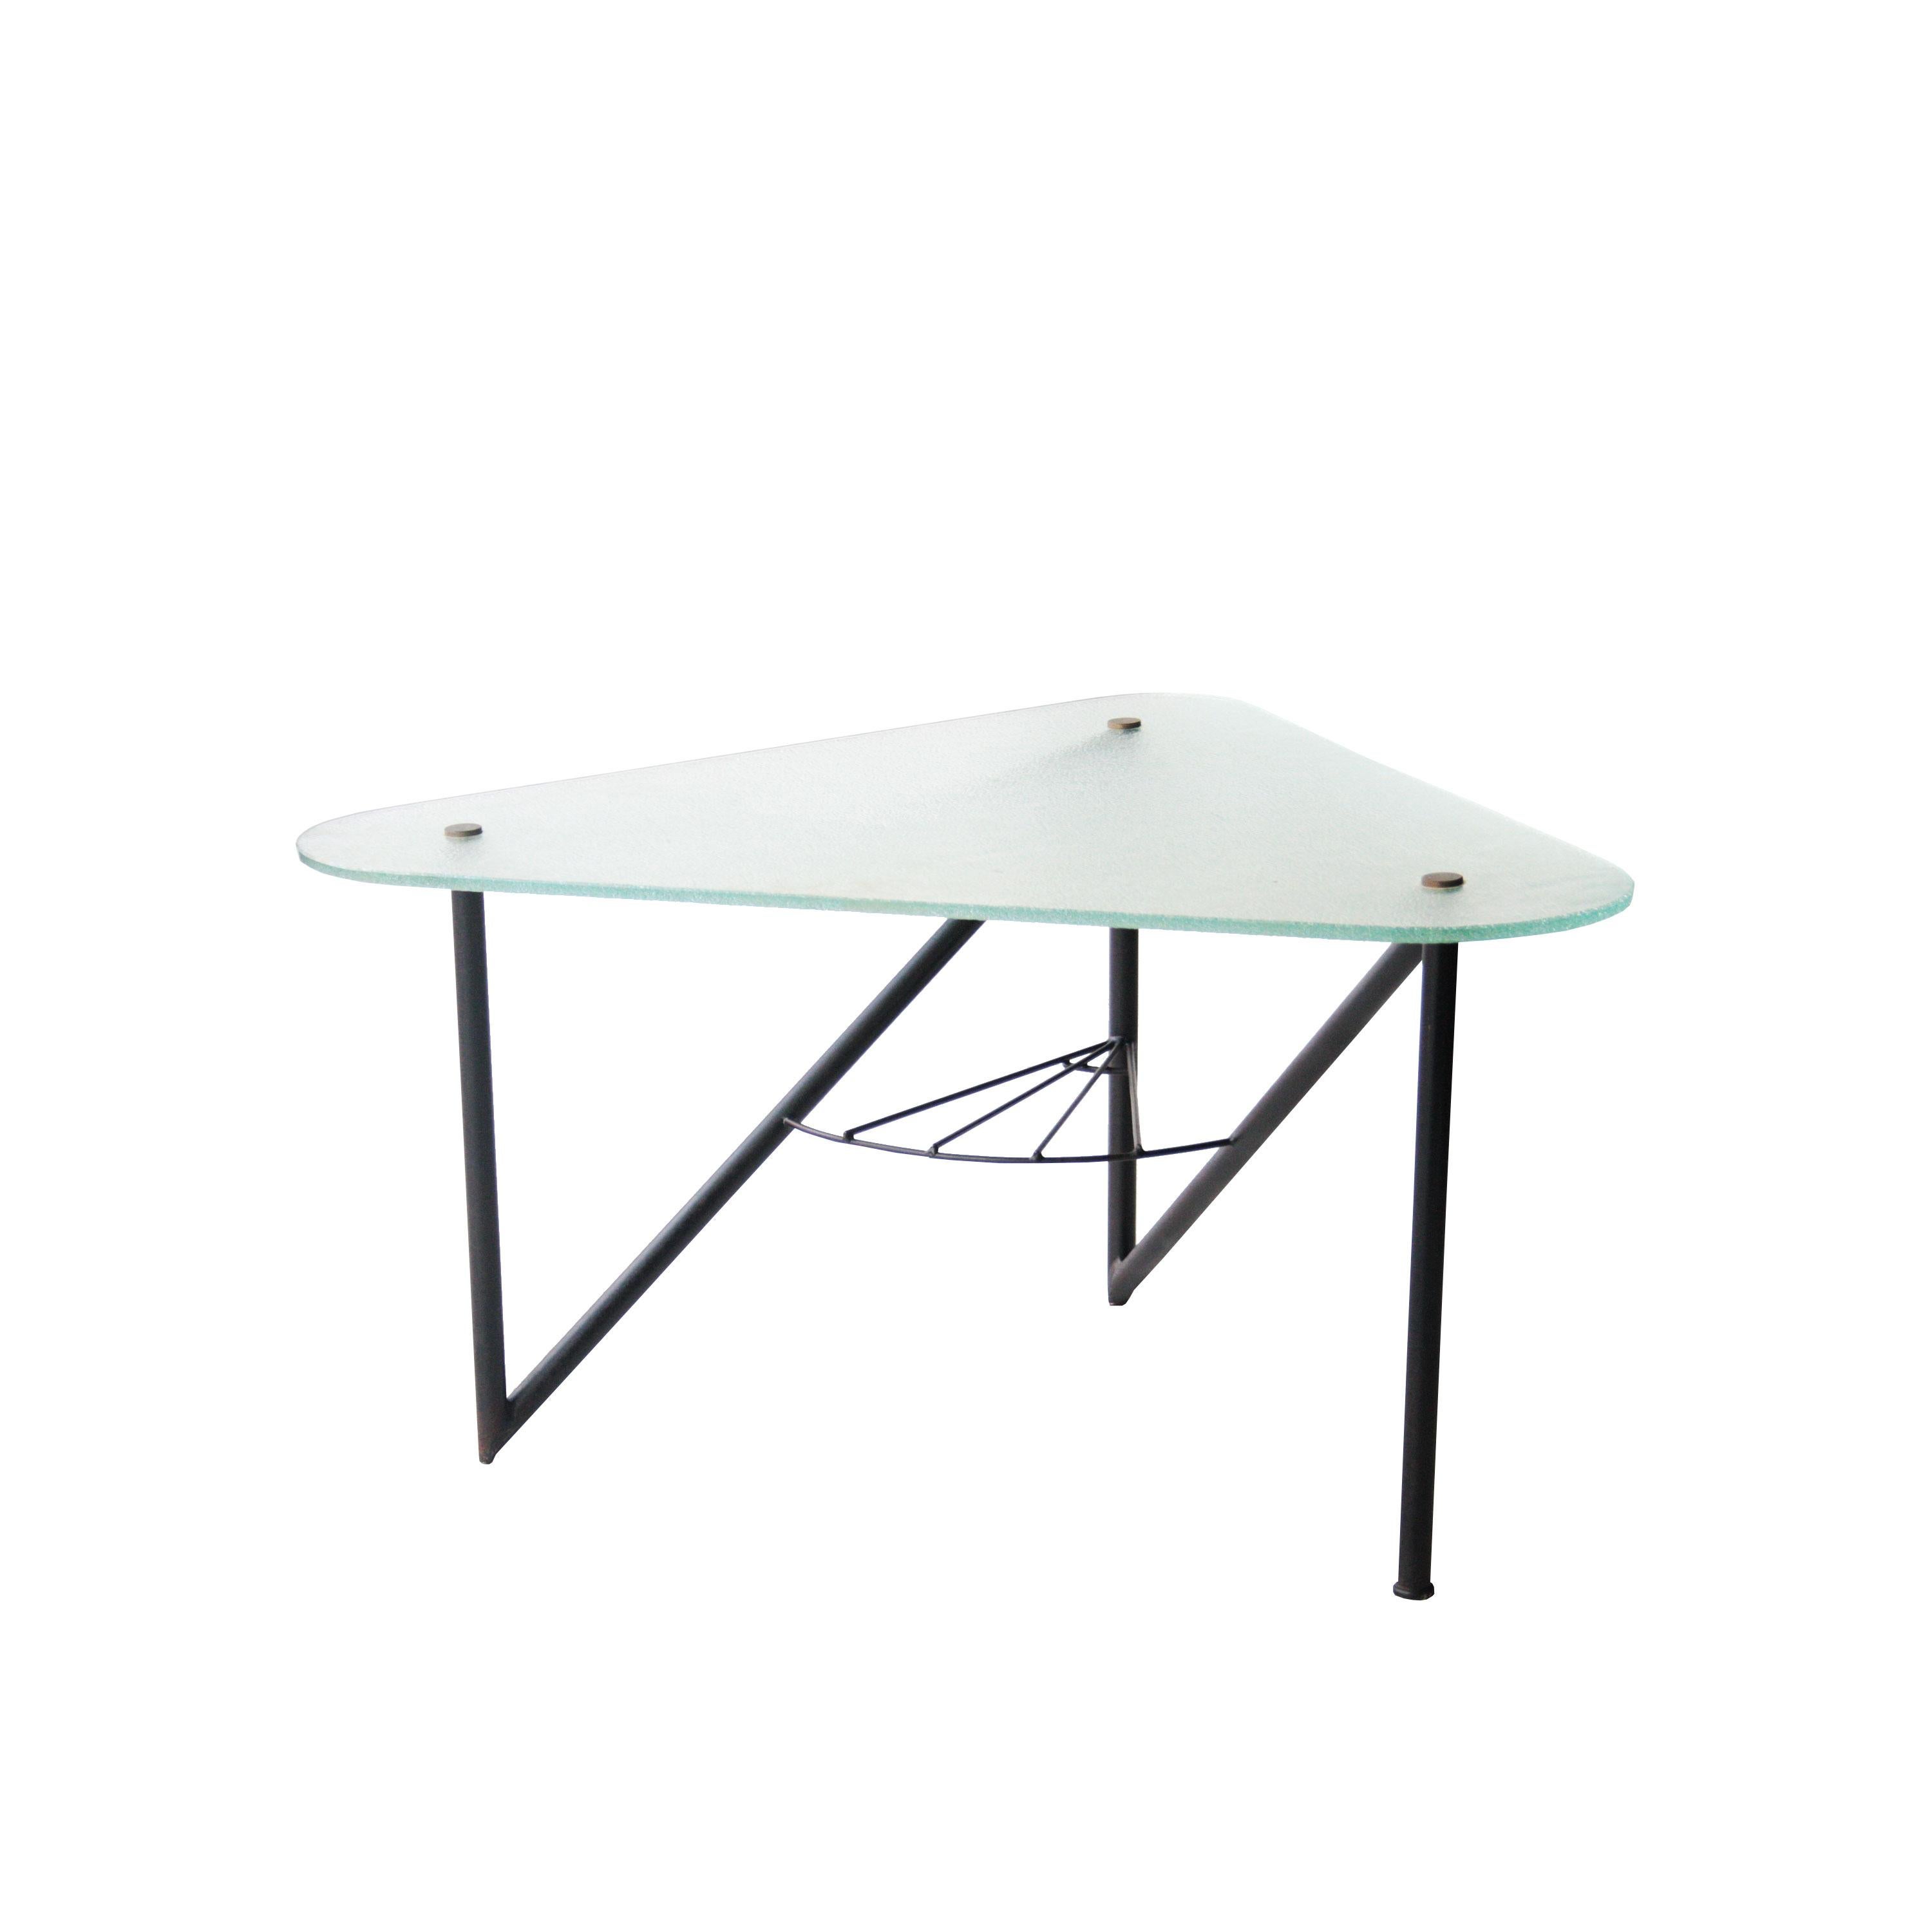 Coffee table with triangular frosted glass top, and black lacquered metal structure.